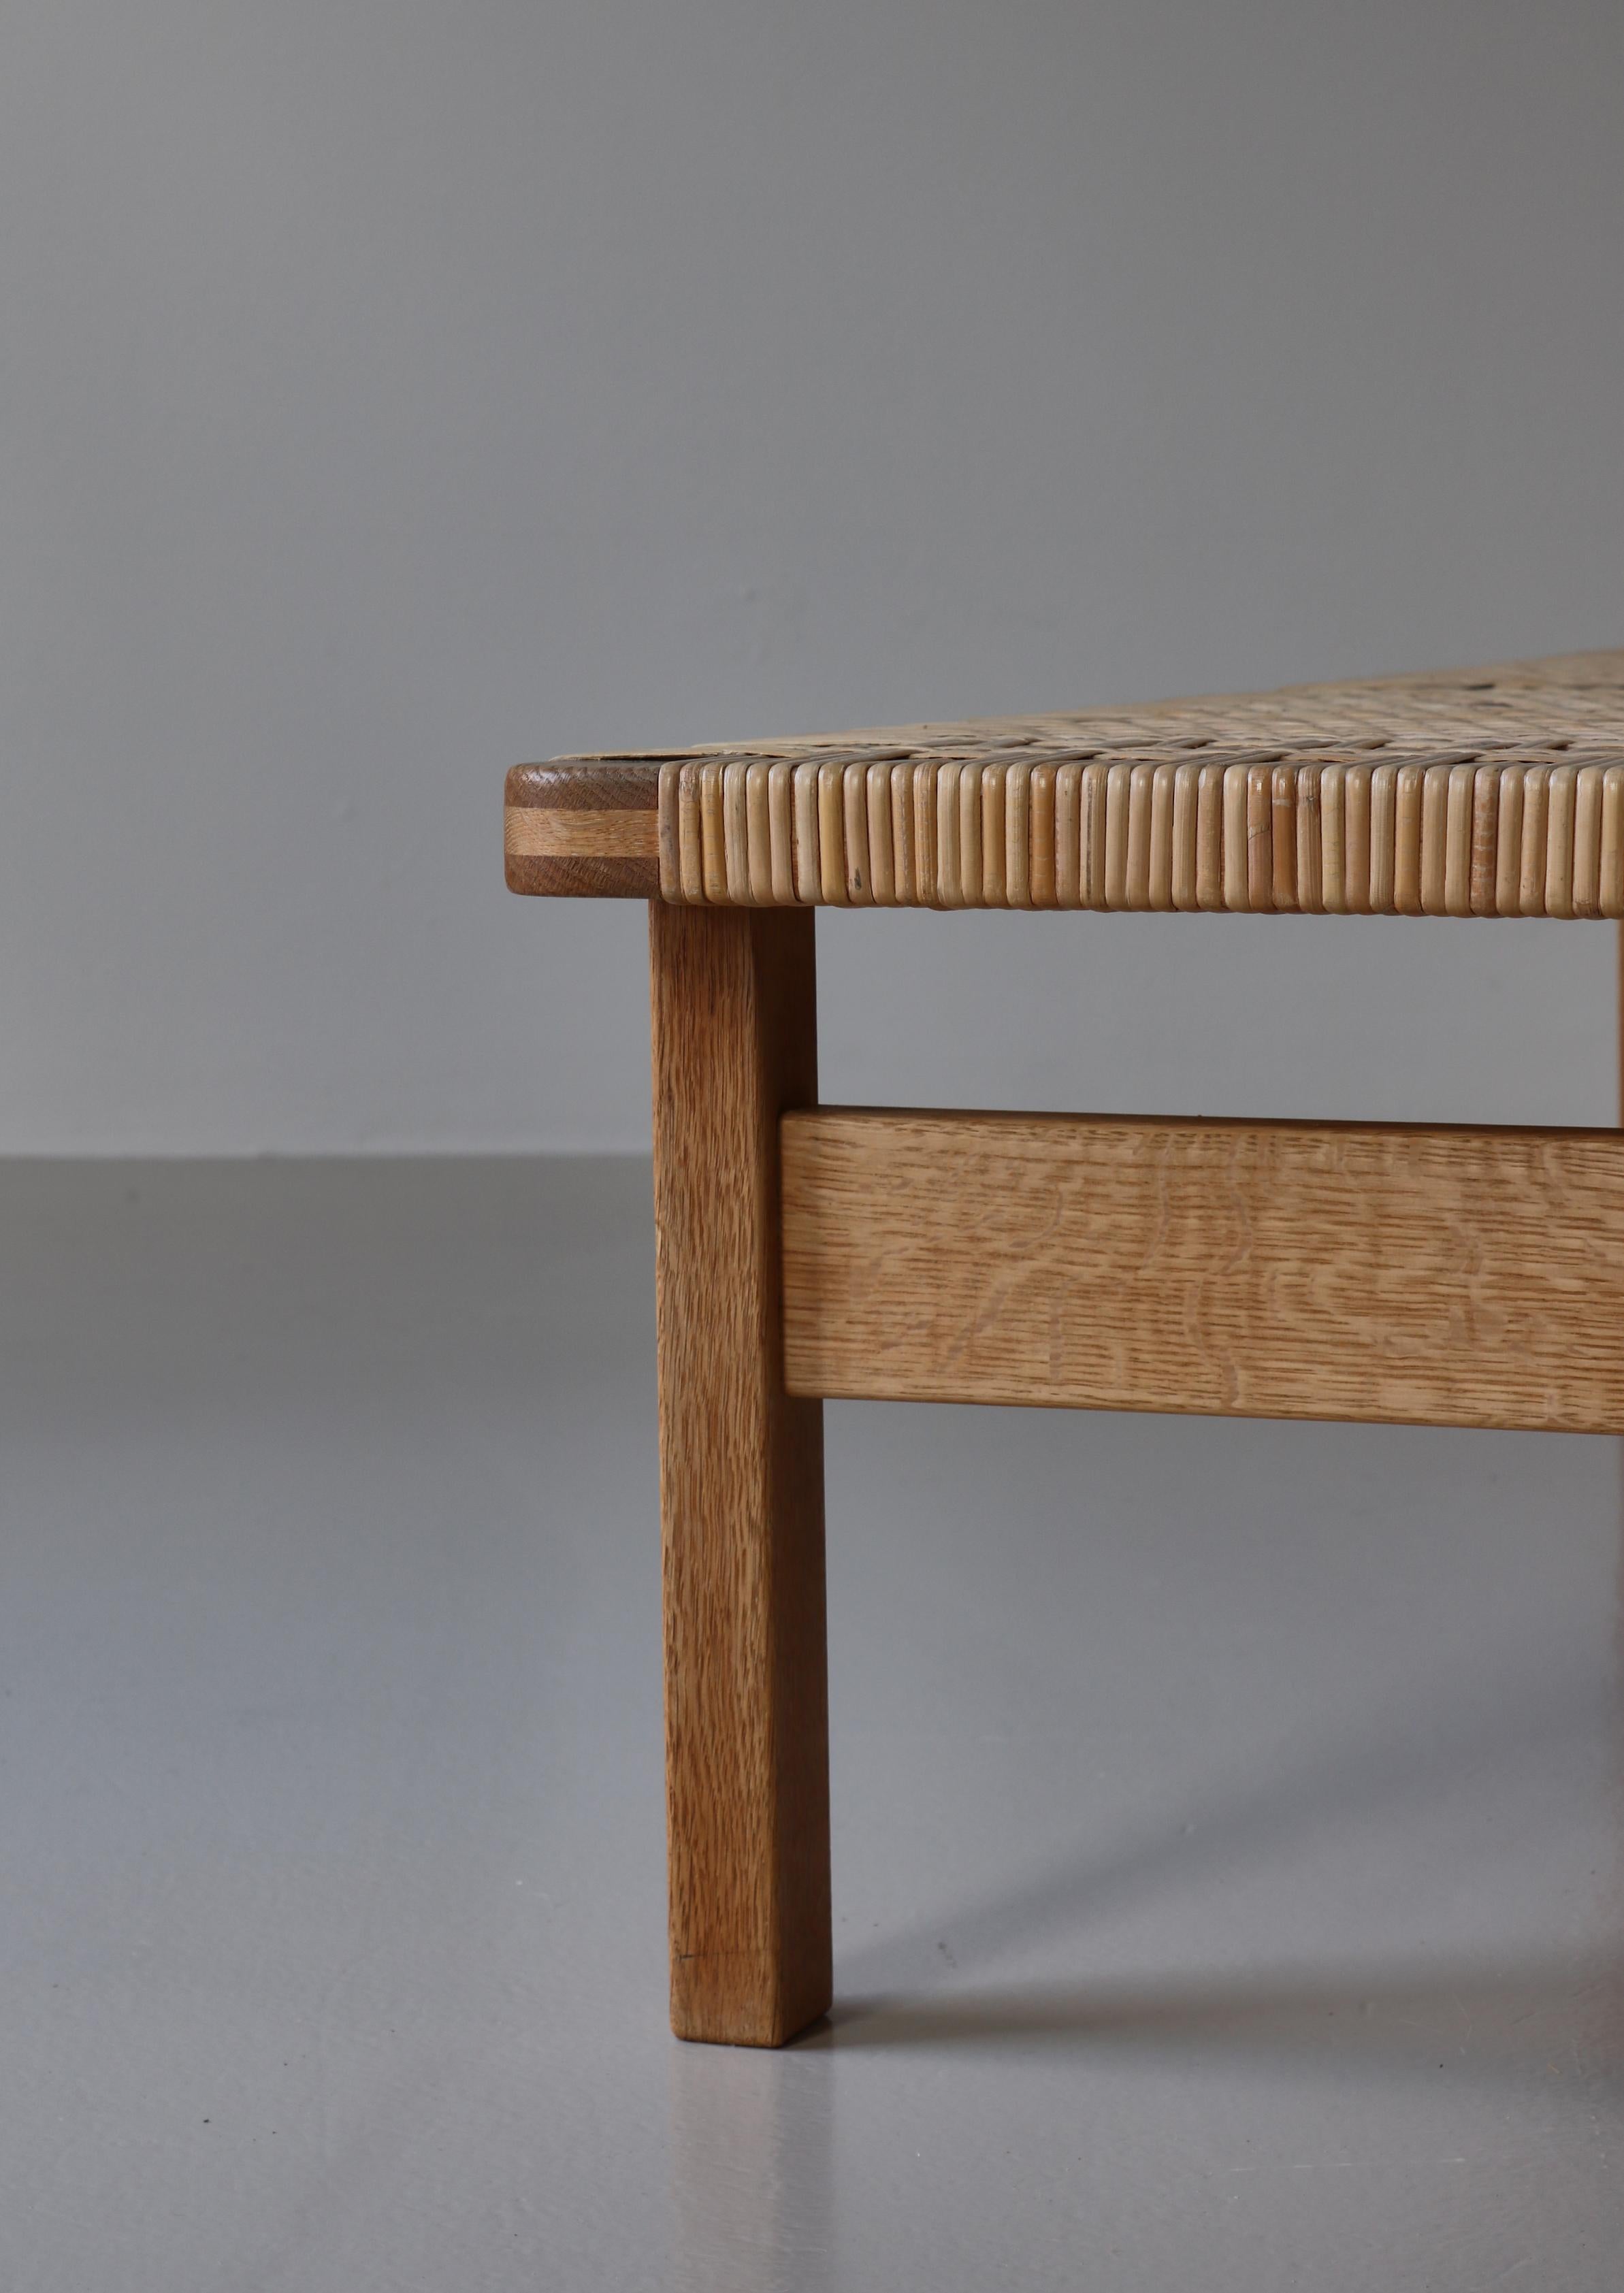 Borge Mogensen Large Side Table or Bench in Oak and Rattan Cane, 1960s, Denmark For Sale 4